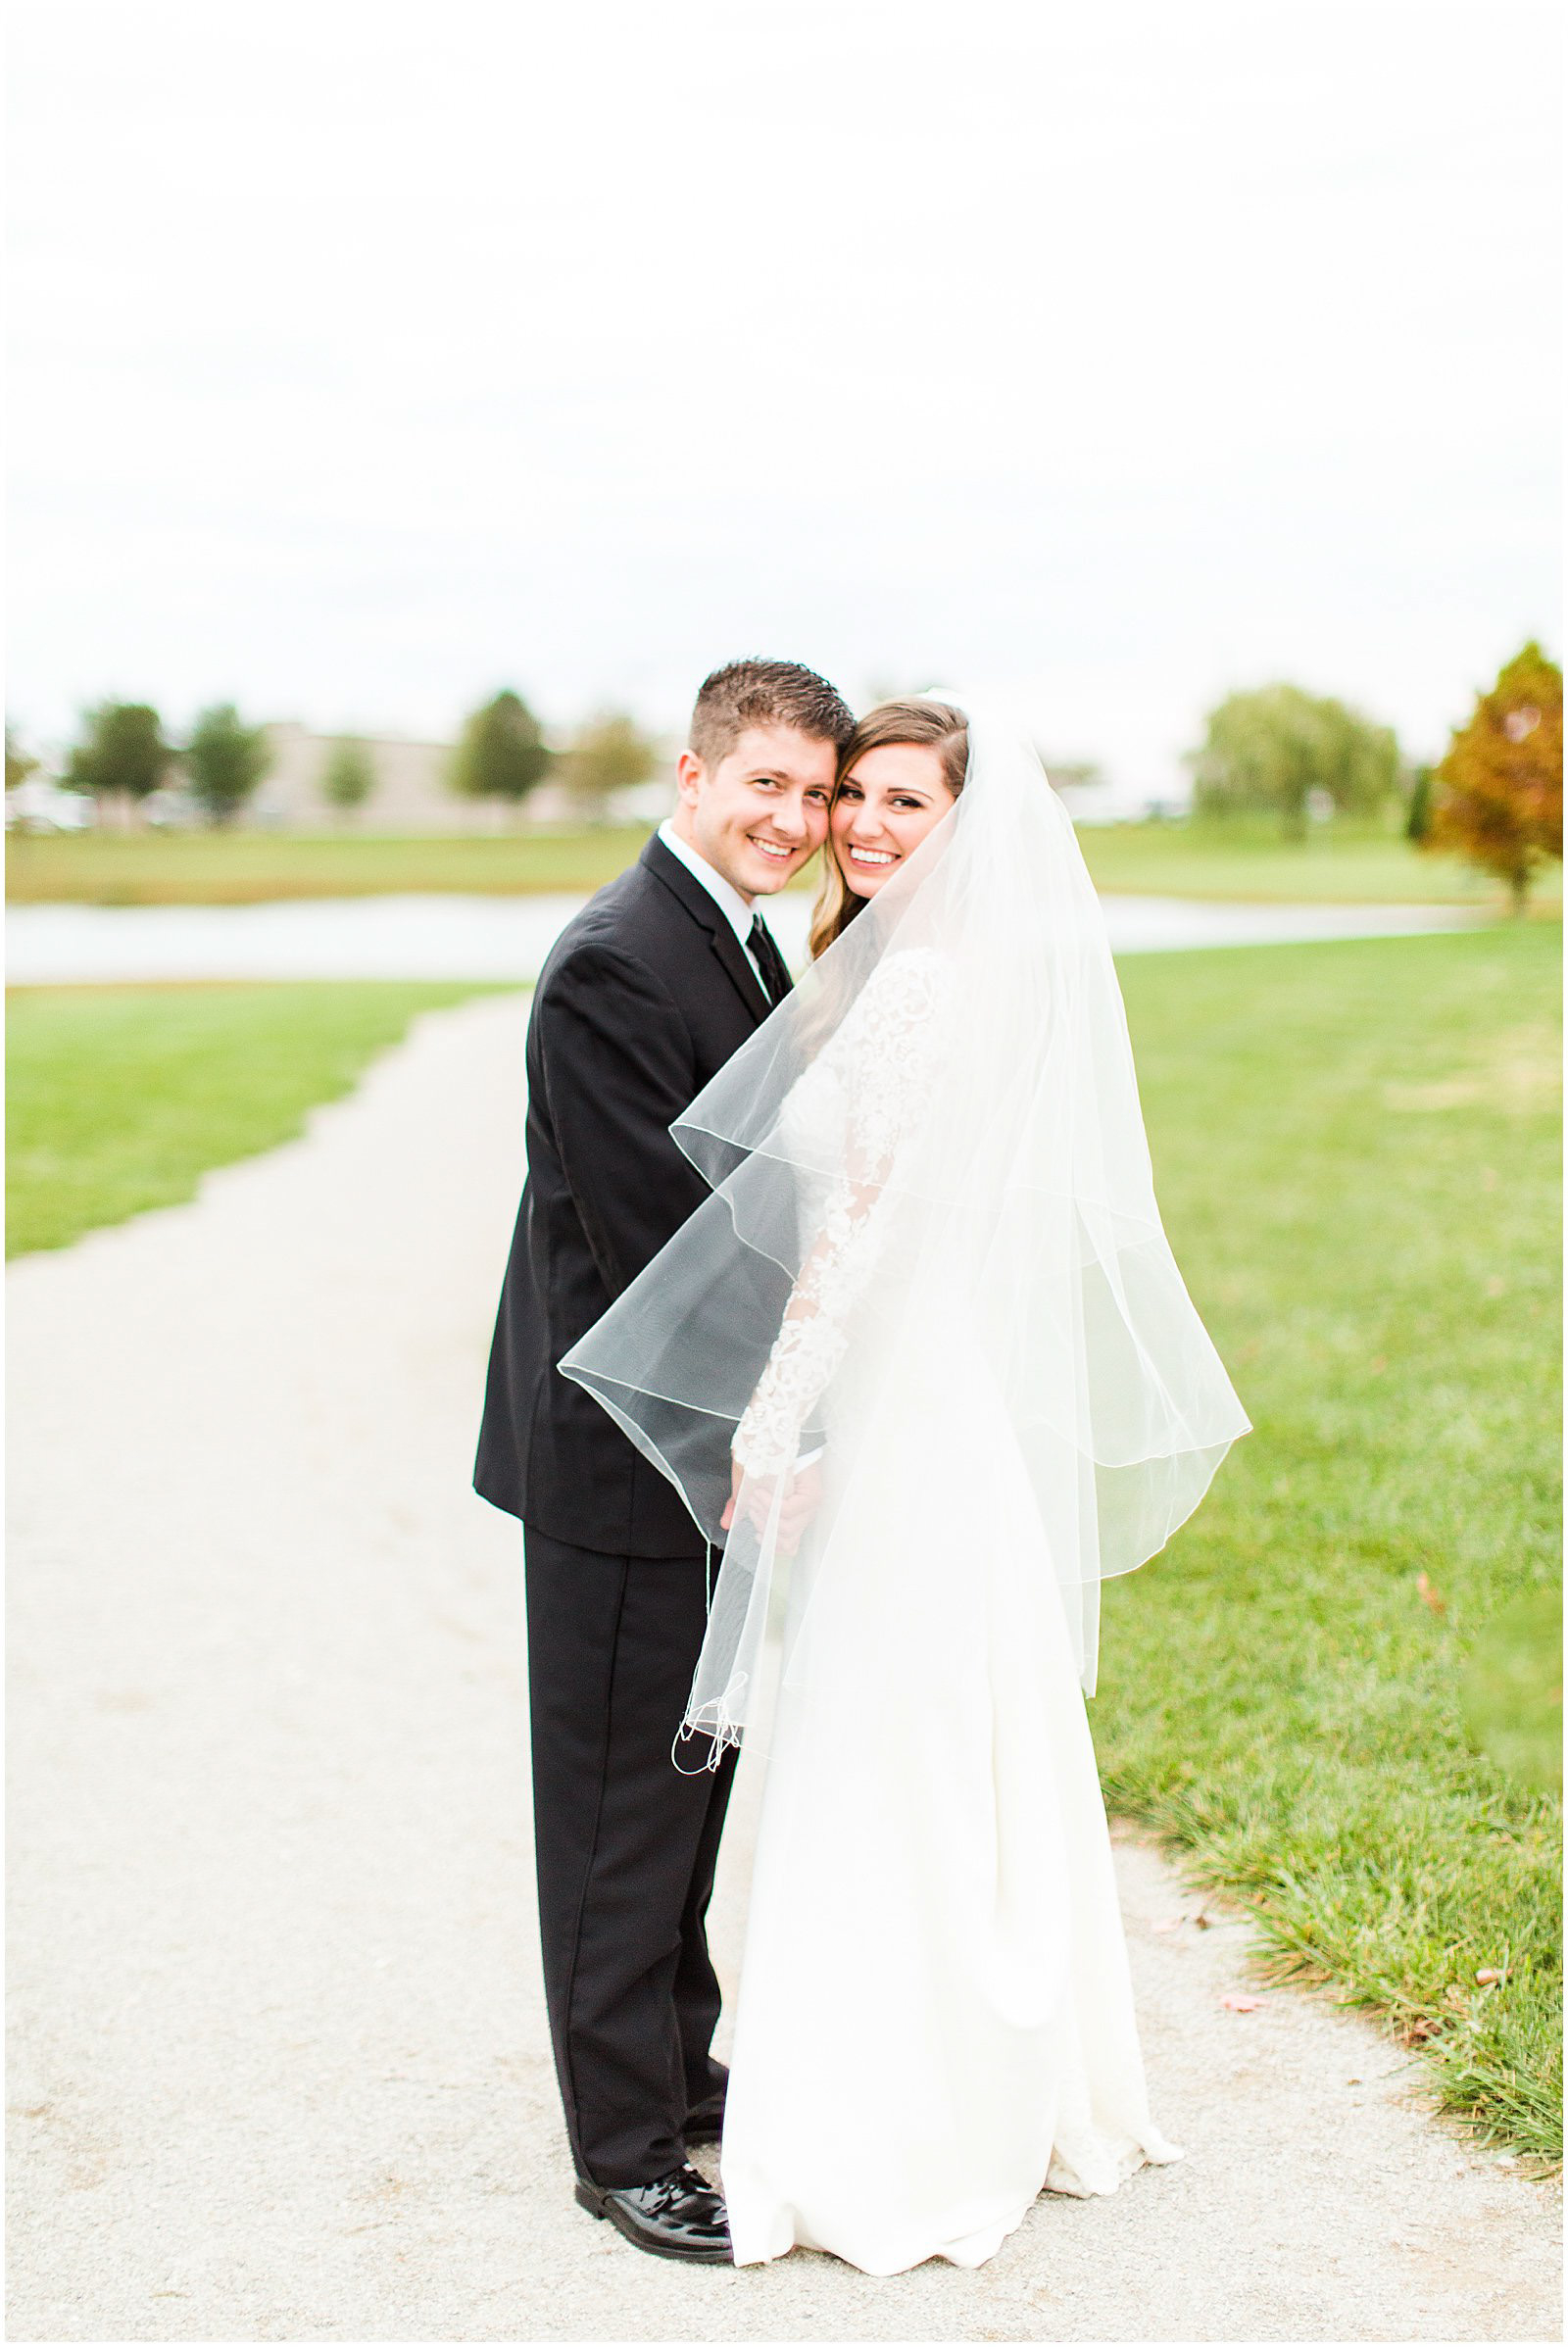 A Romantic Fall Wedding in Ferdinand, IN | Tori and Kyle | Bret and Brandie Photography 0141.jpg